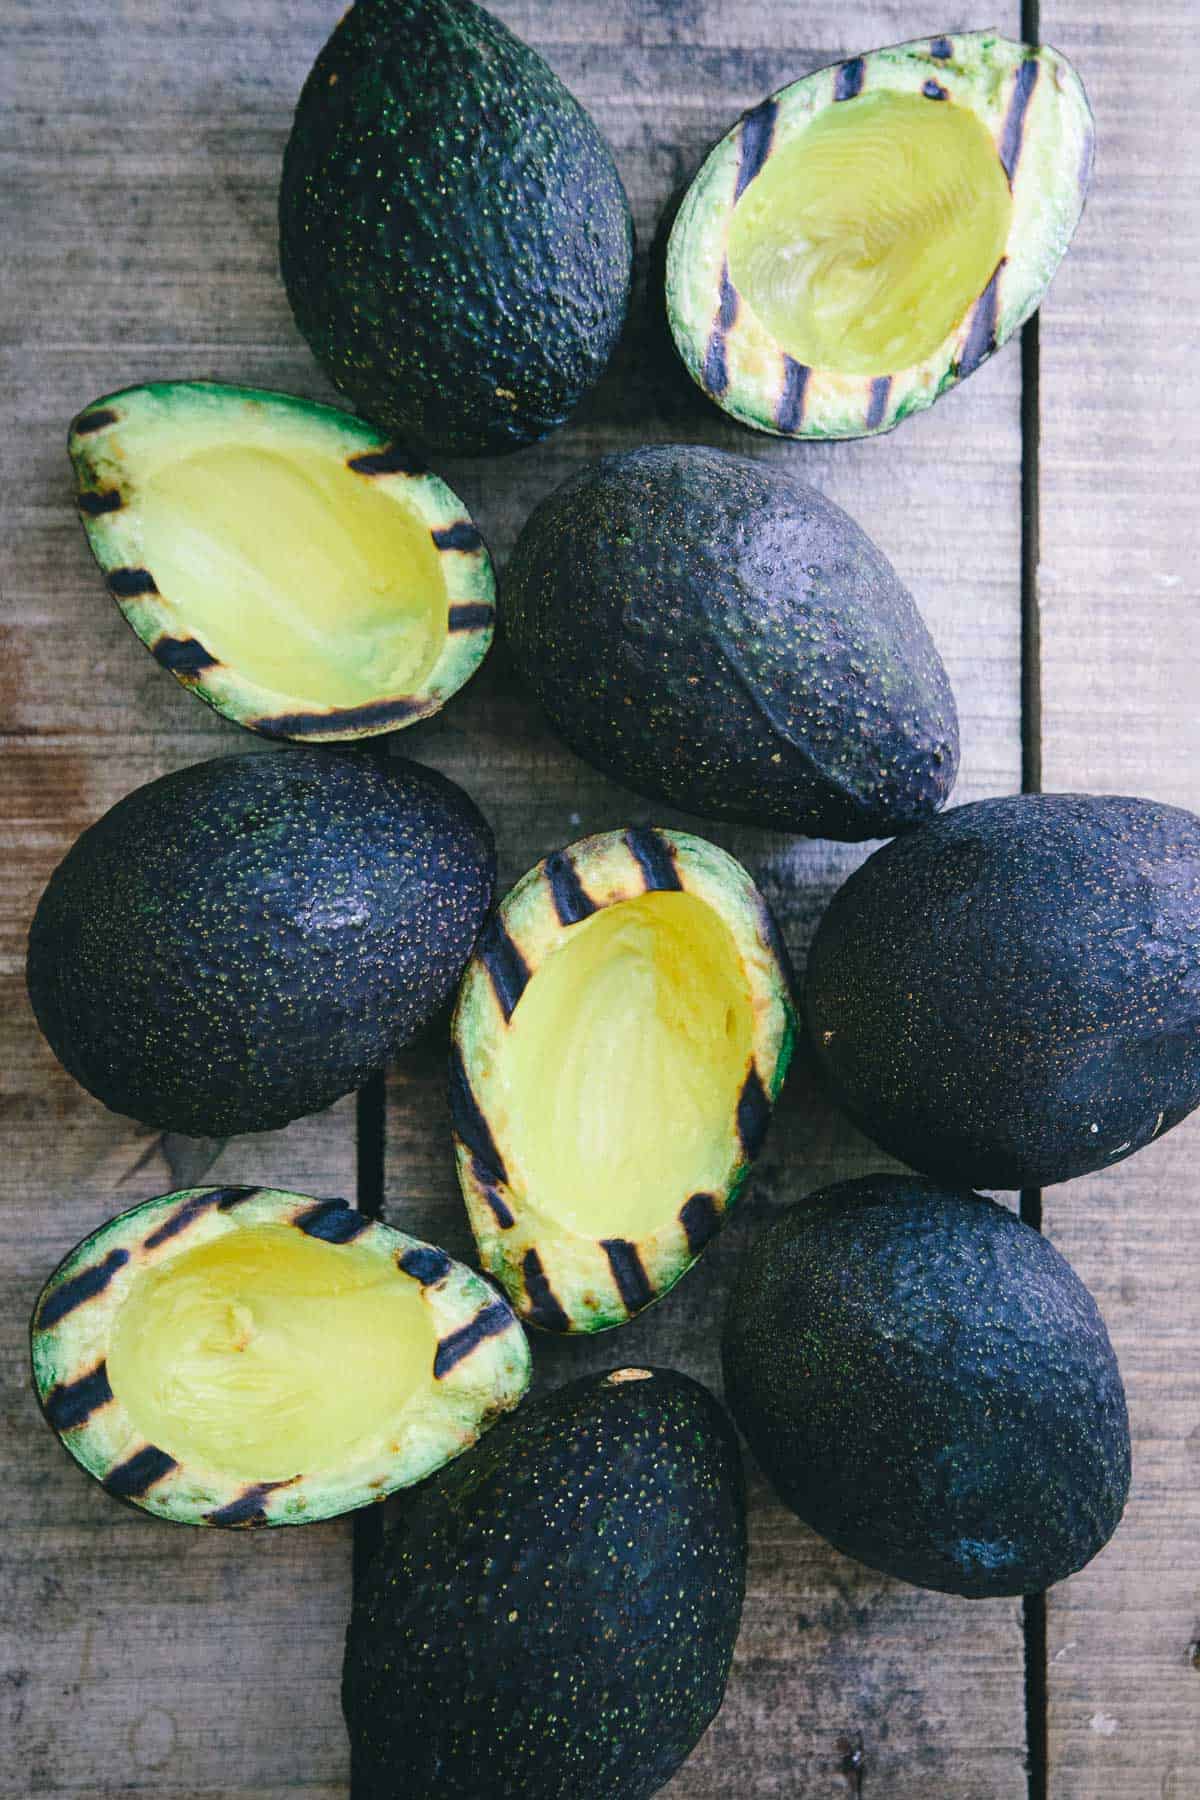 These grilled avocados are stuffed with Asian marinated steak for an easy, healthy and delicious summer meal.